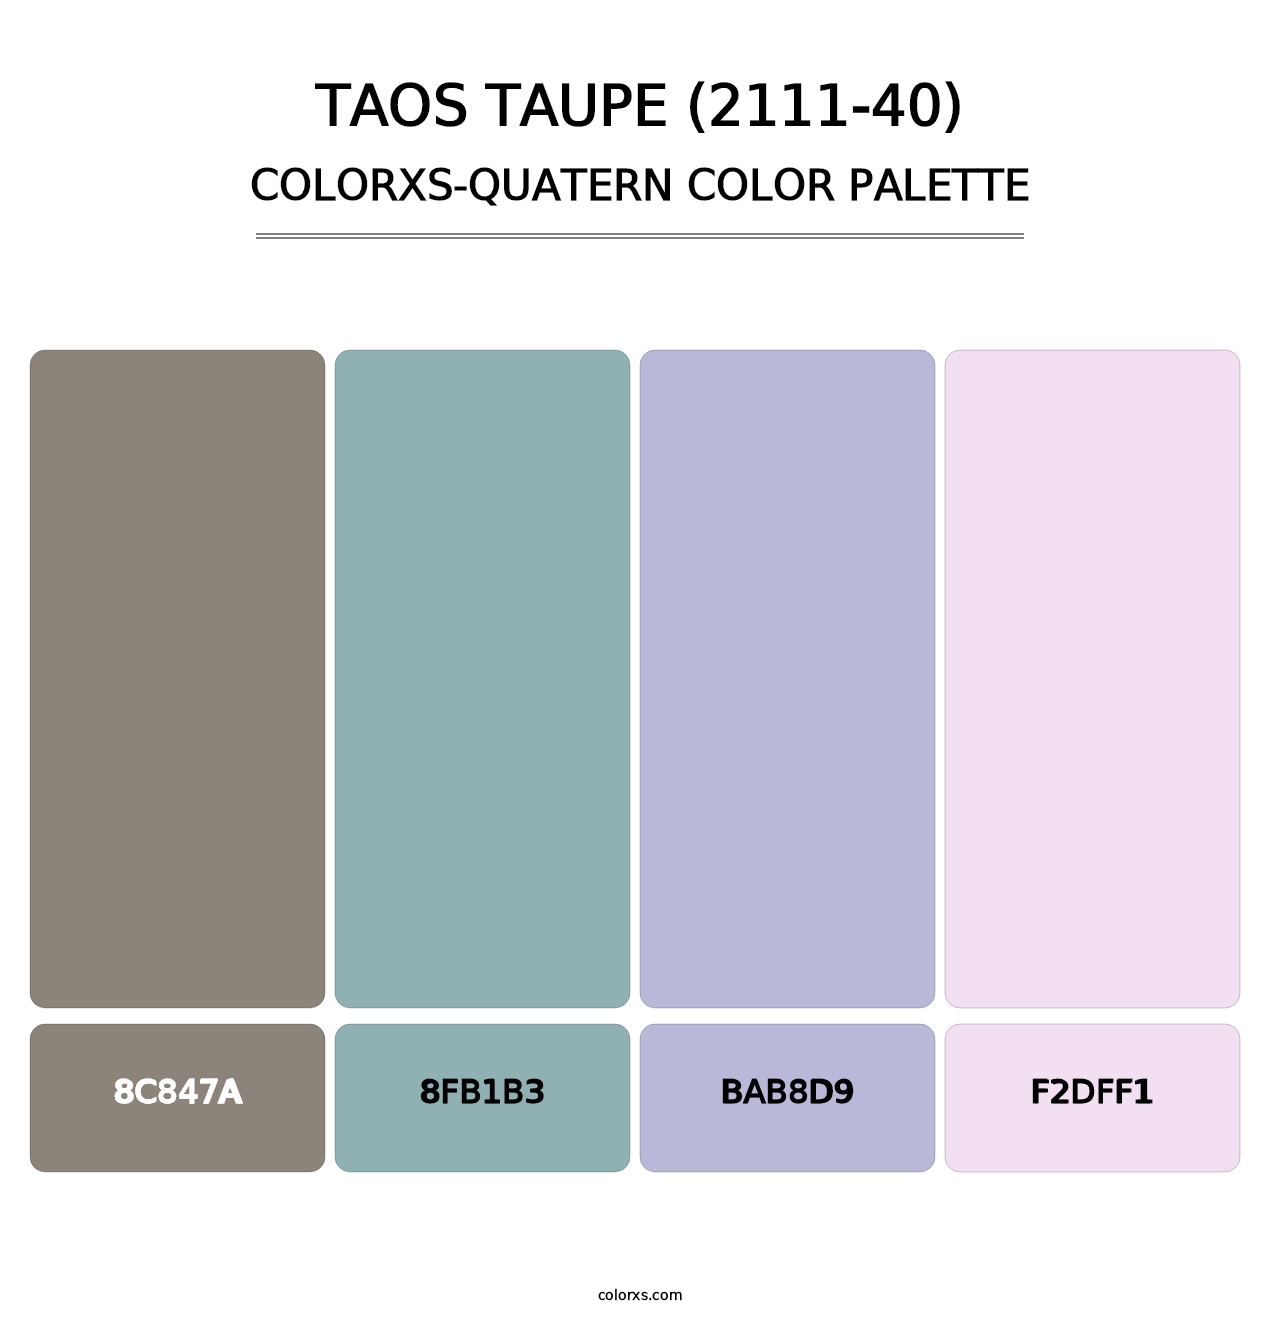 Taos Taupe (2111-40) - Colorxs Quatern Palette